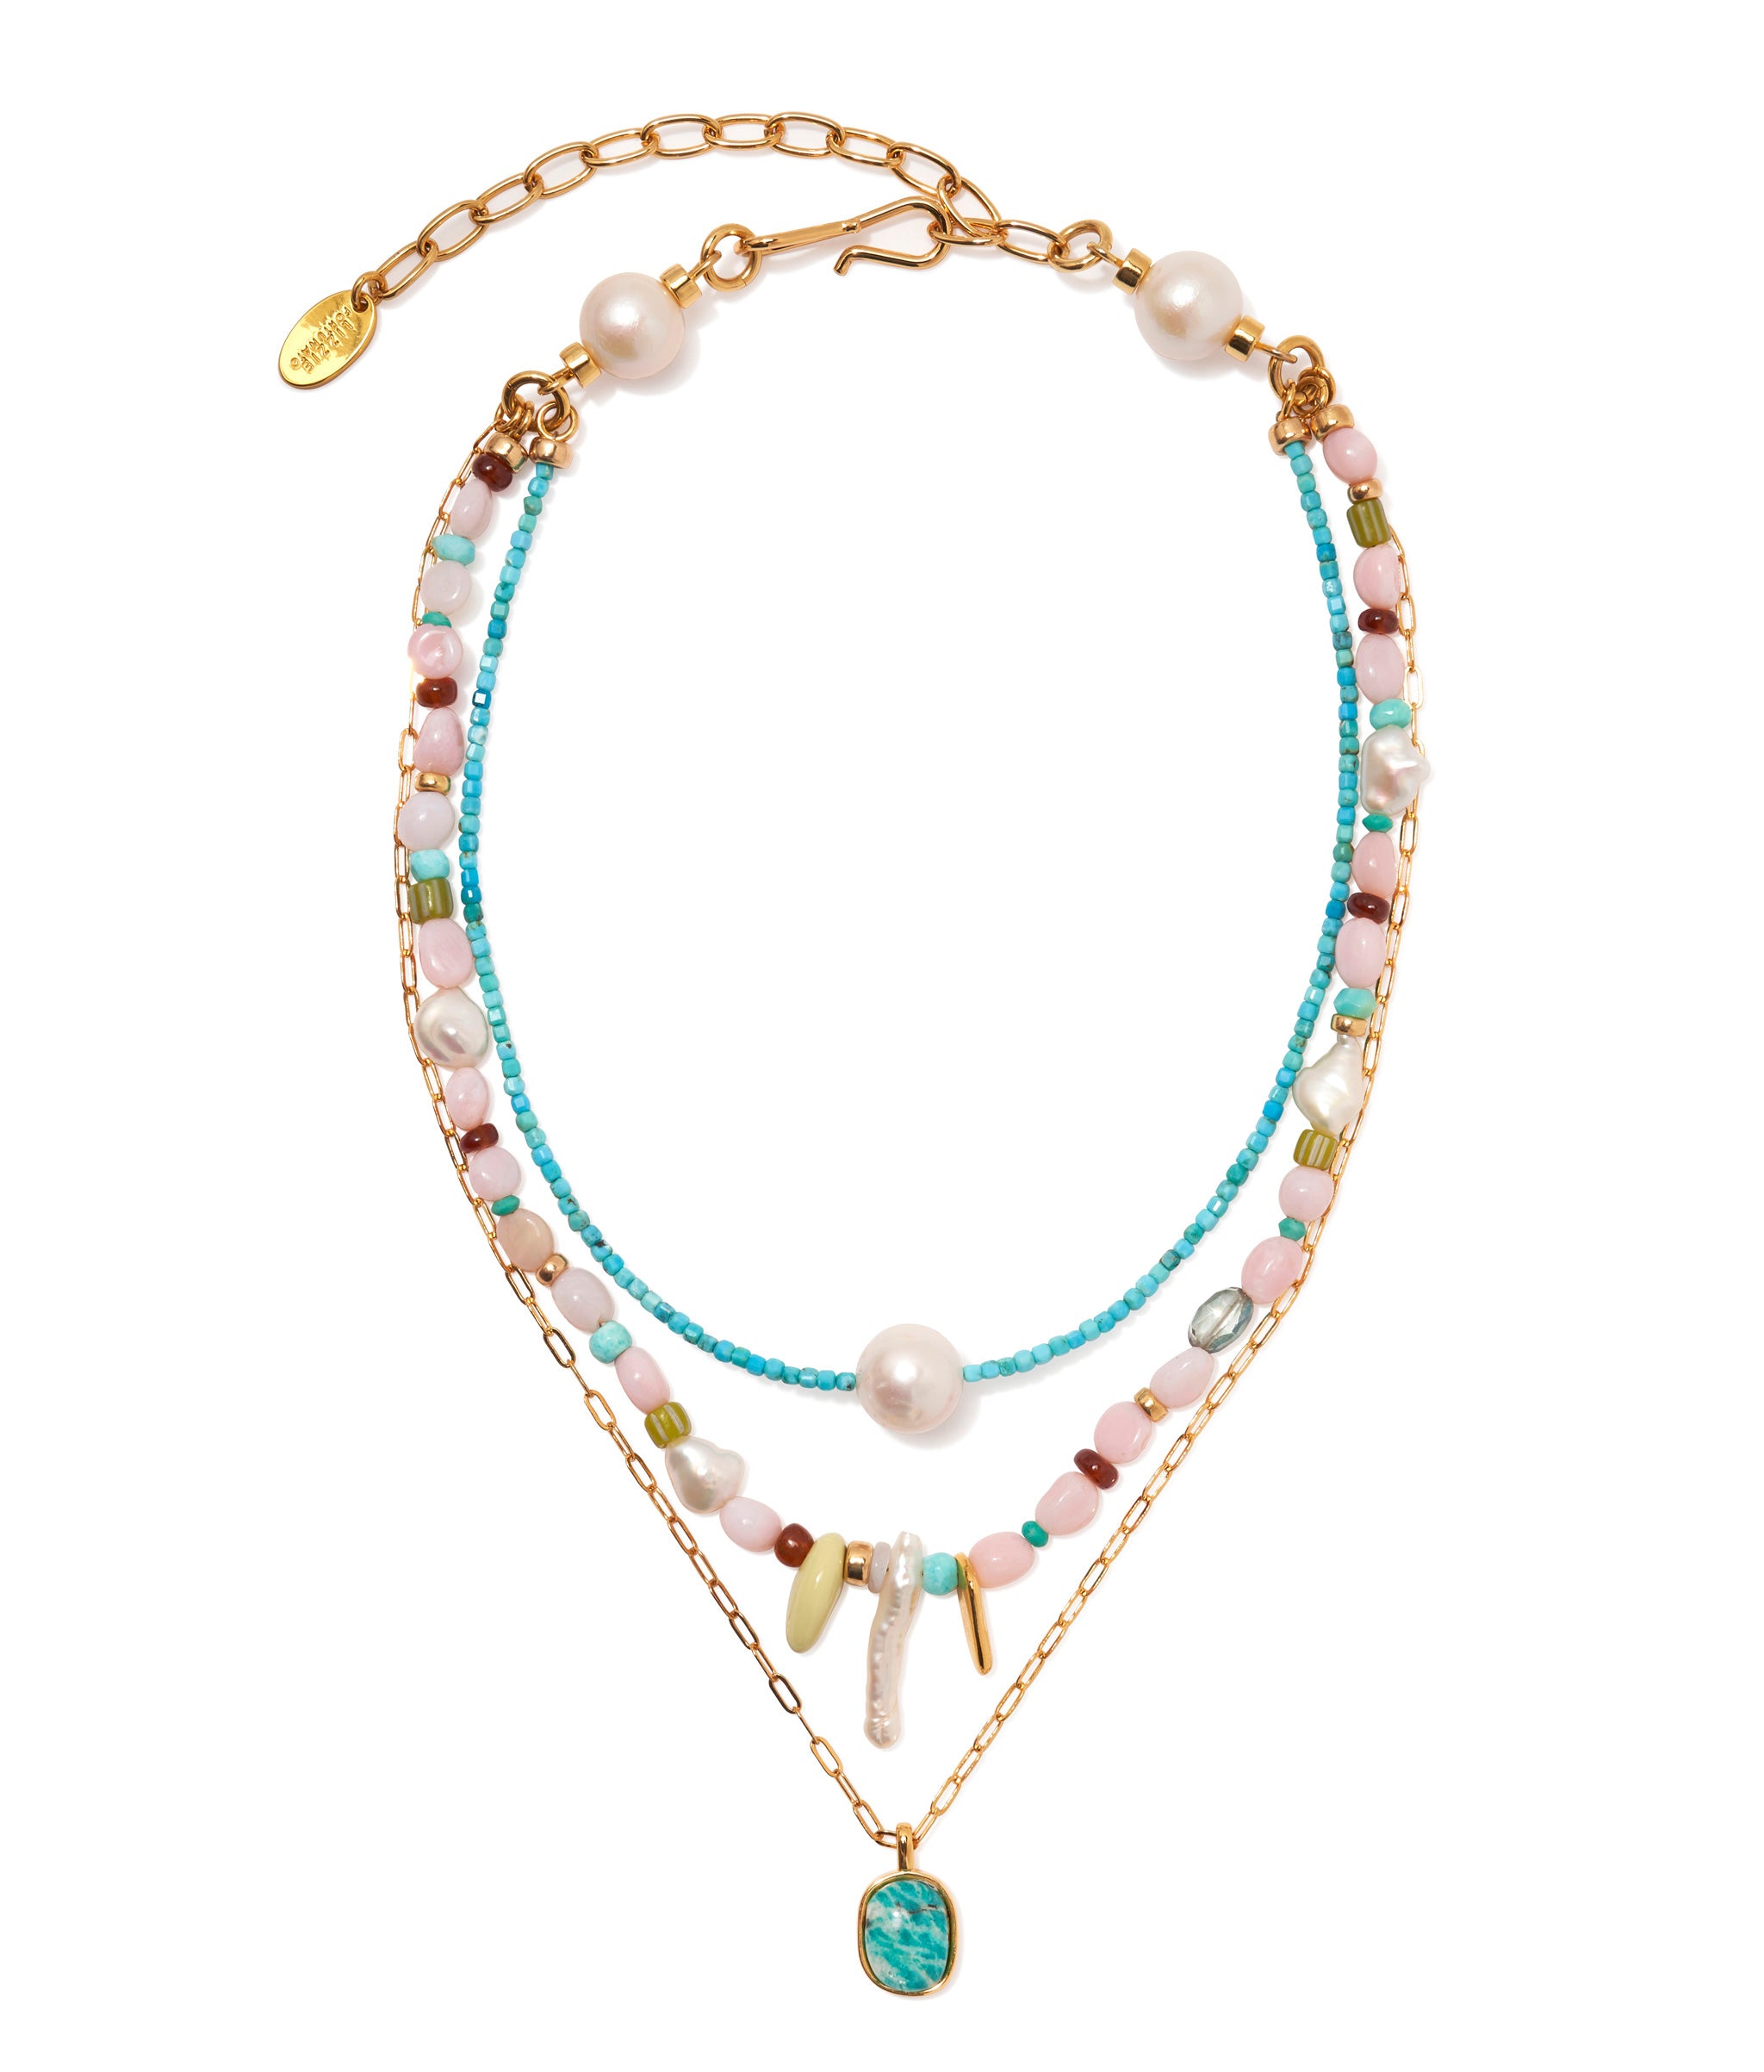 Off shore necklace in Pink Sands. Amazonite pendant, colorful opal, glass, turquoise, and garnet beads and pearl charm.